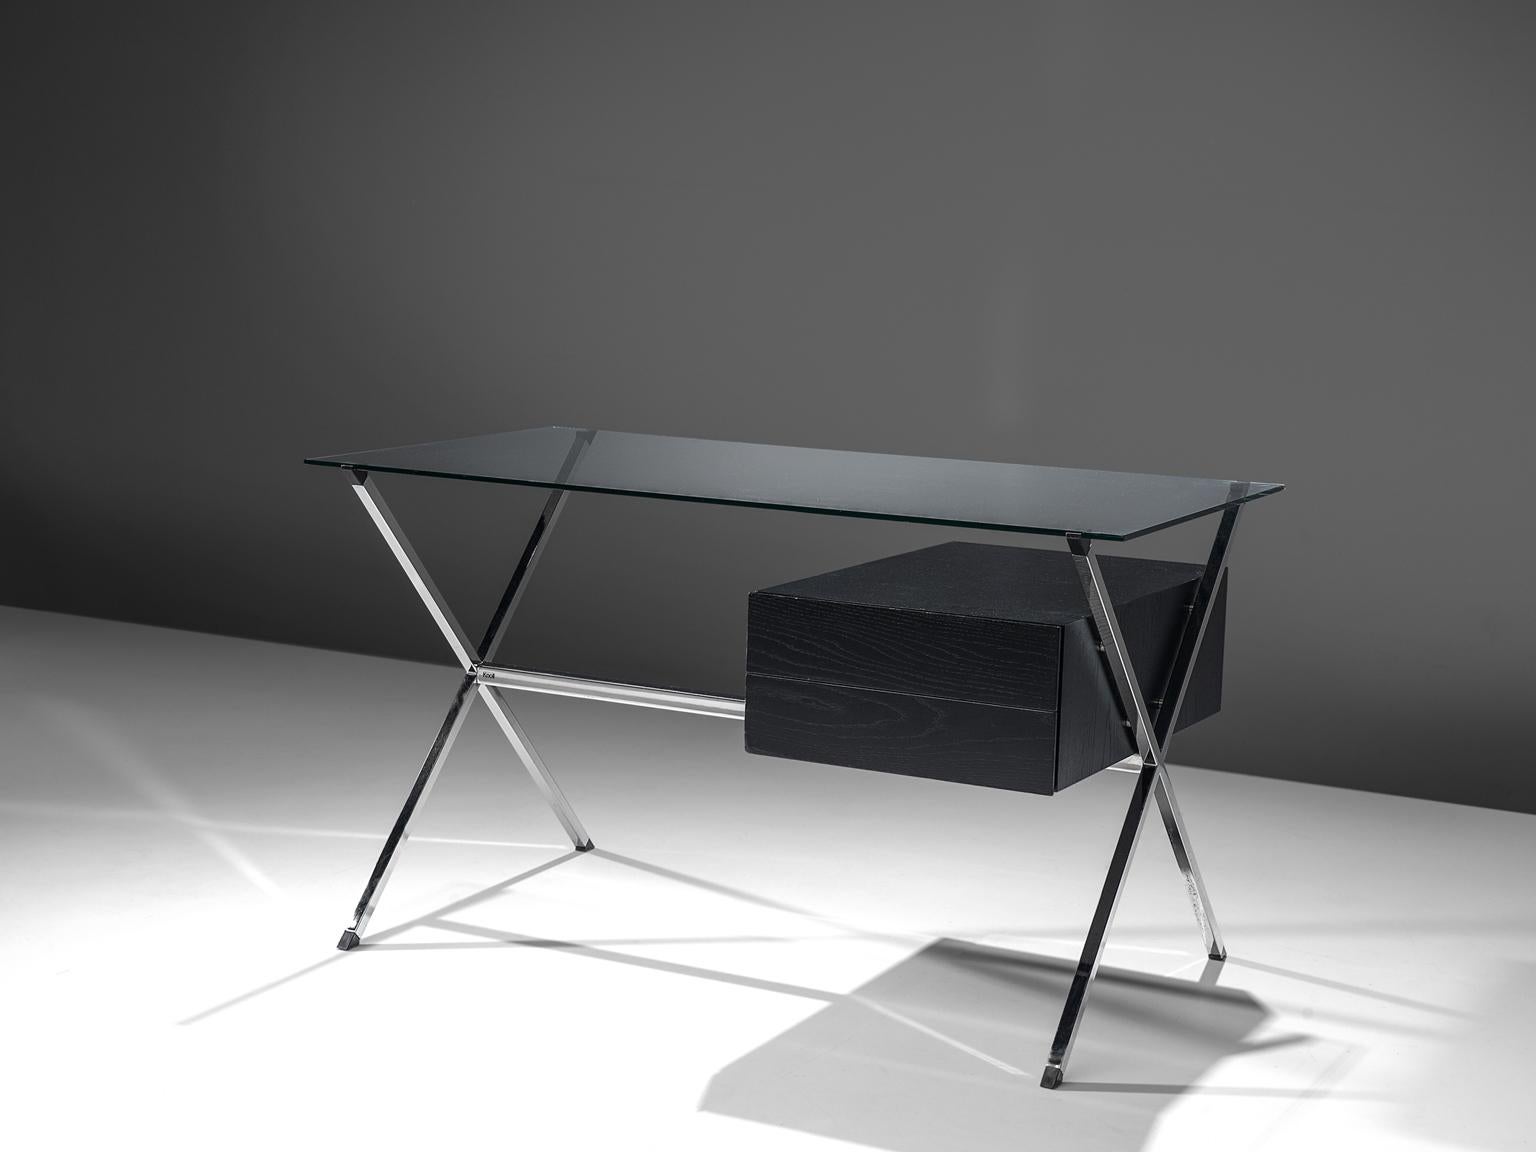 Franco Albini for Knoll, Albini desk 1928, glass, wood and chromed steel, Italy, design from 1949

Franco Albini’s 1928 desk combines glass, steel and wood which resulted in a minimalistic balance. The desk features Albini’s design philosophy and